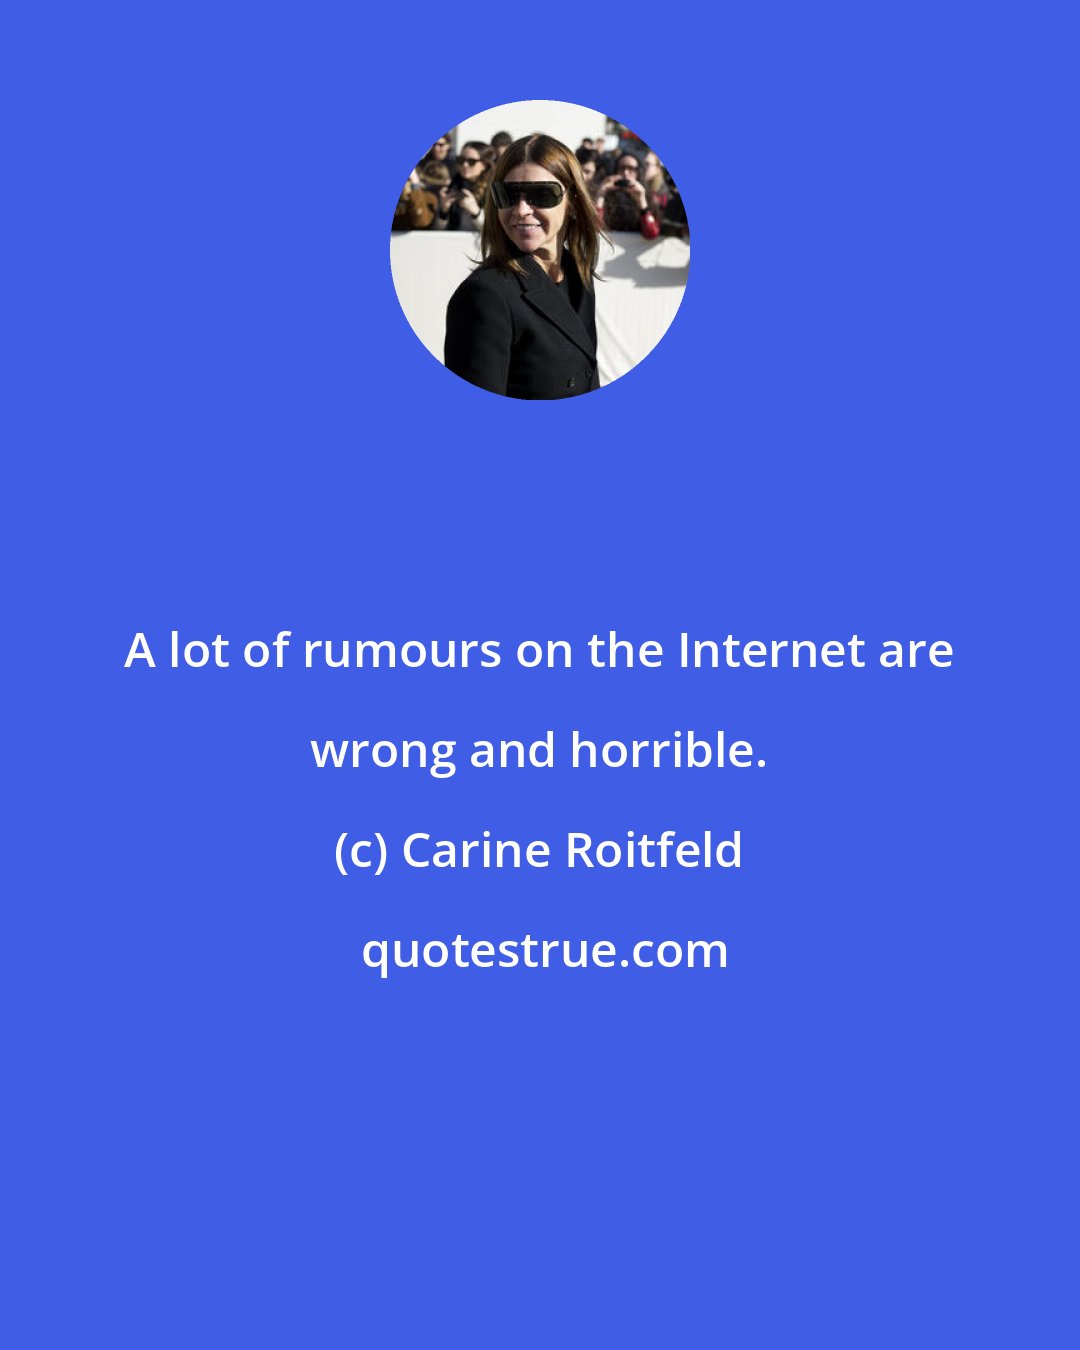 Carine Roitfeld: A lot of rumours on the Internet are wrong and horrible.